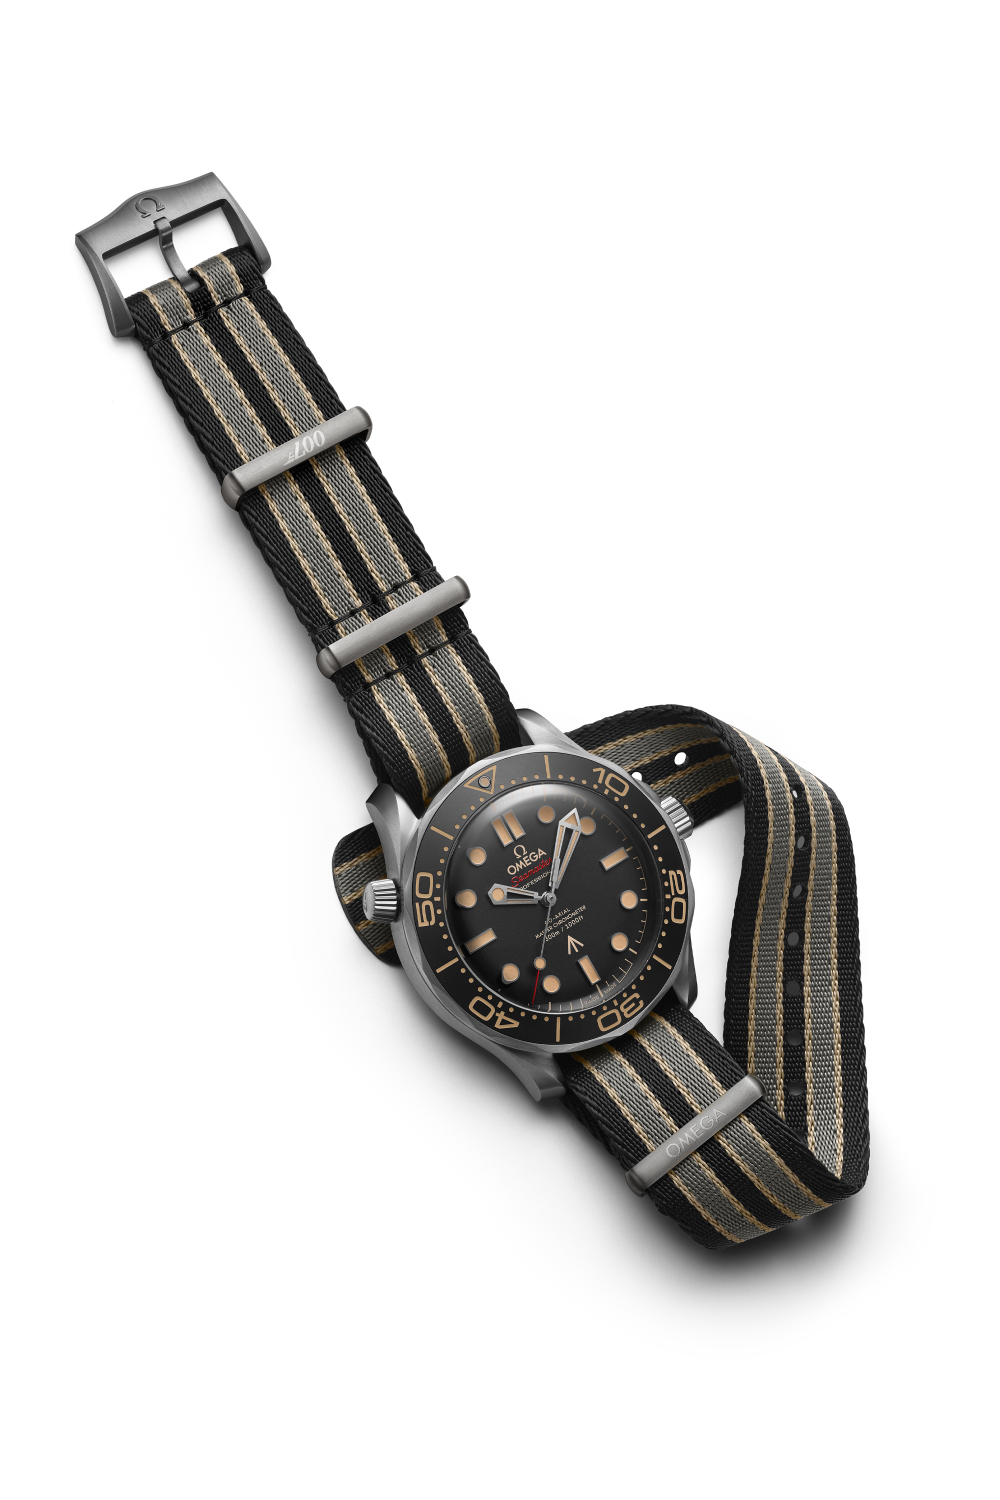 007 Edition Seamaster Diver 300M OMEGA Co-Axial Master Chronometer 42MM